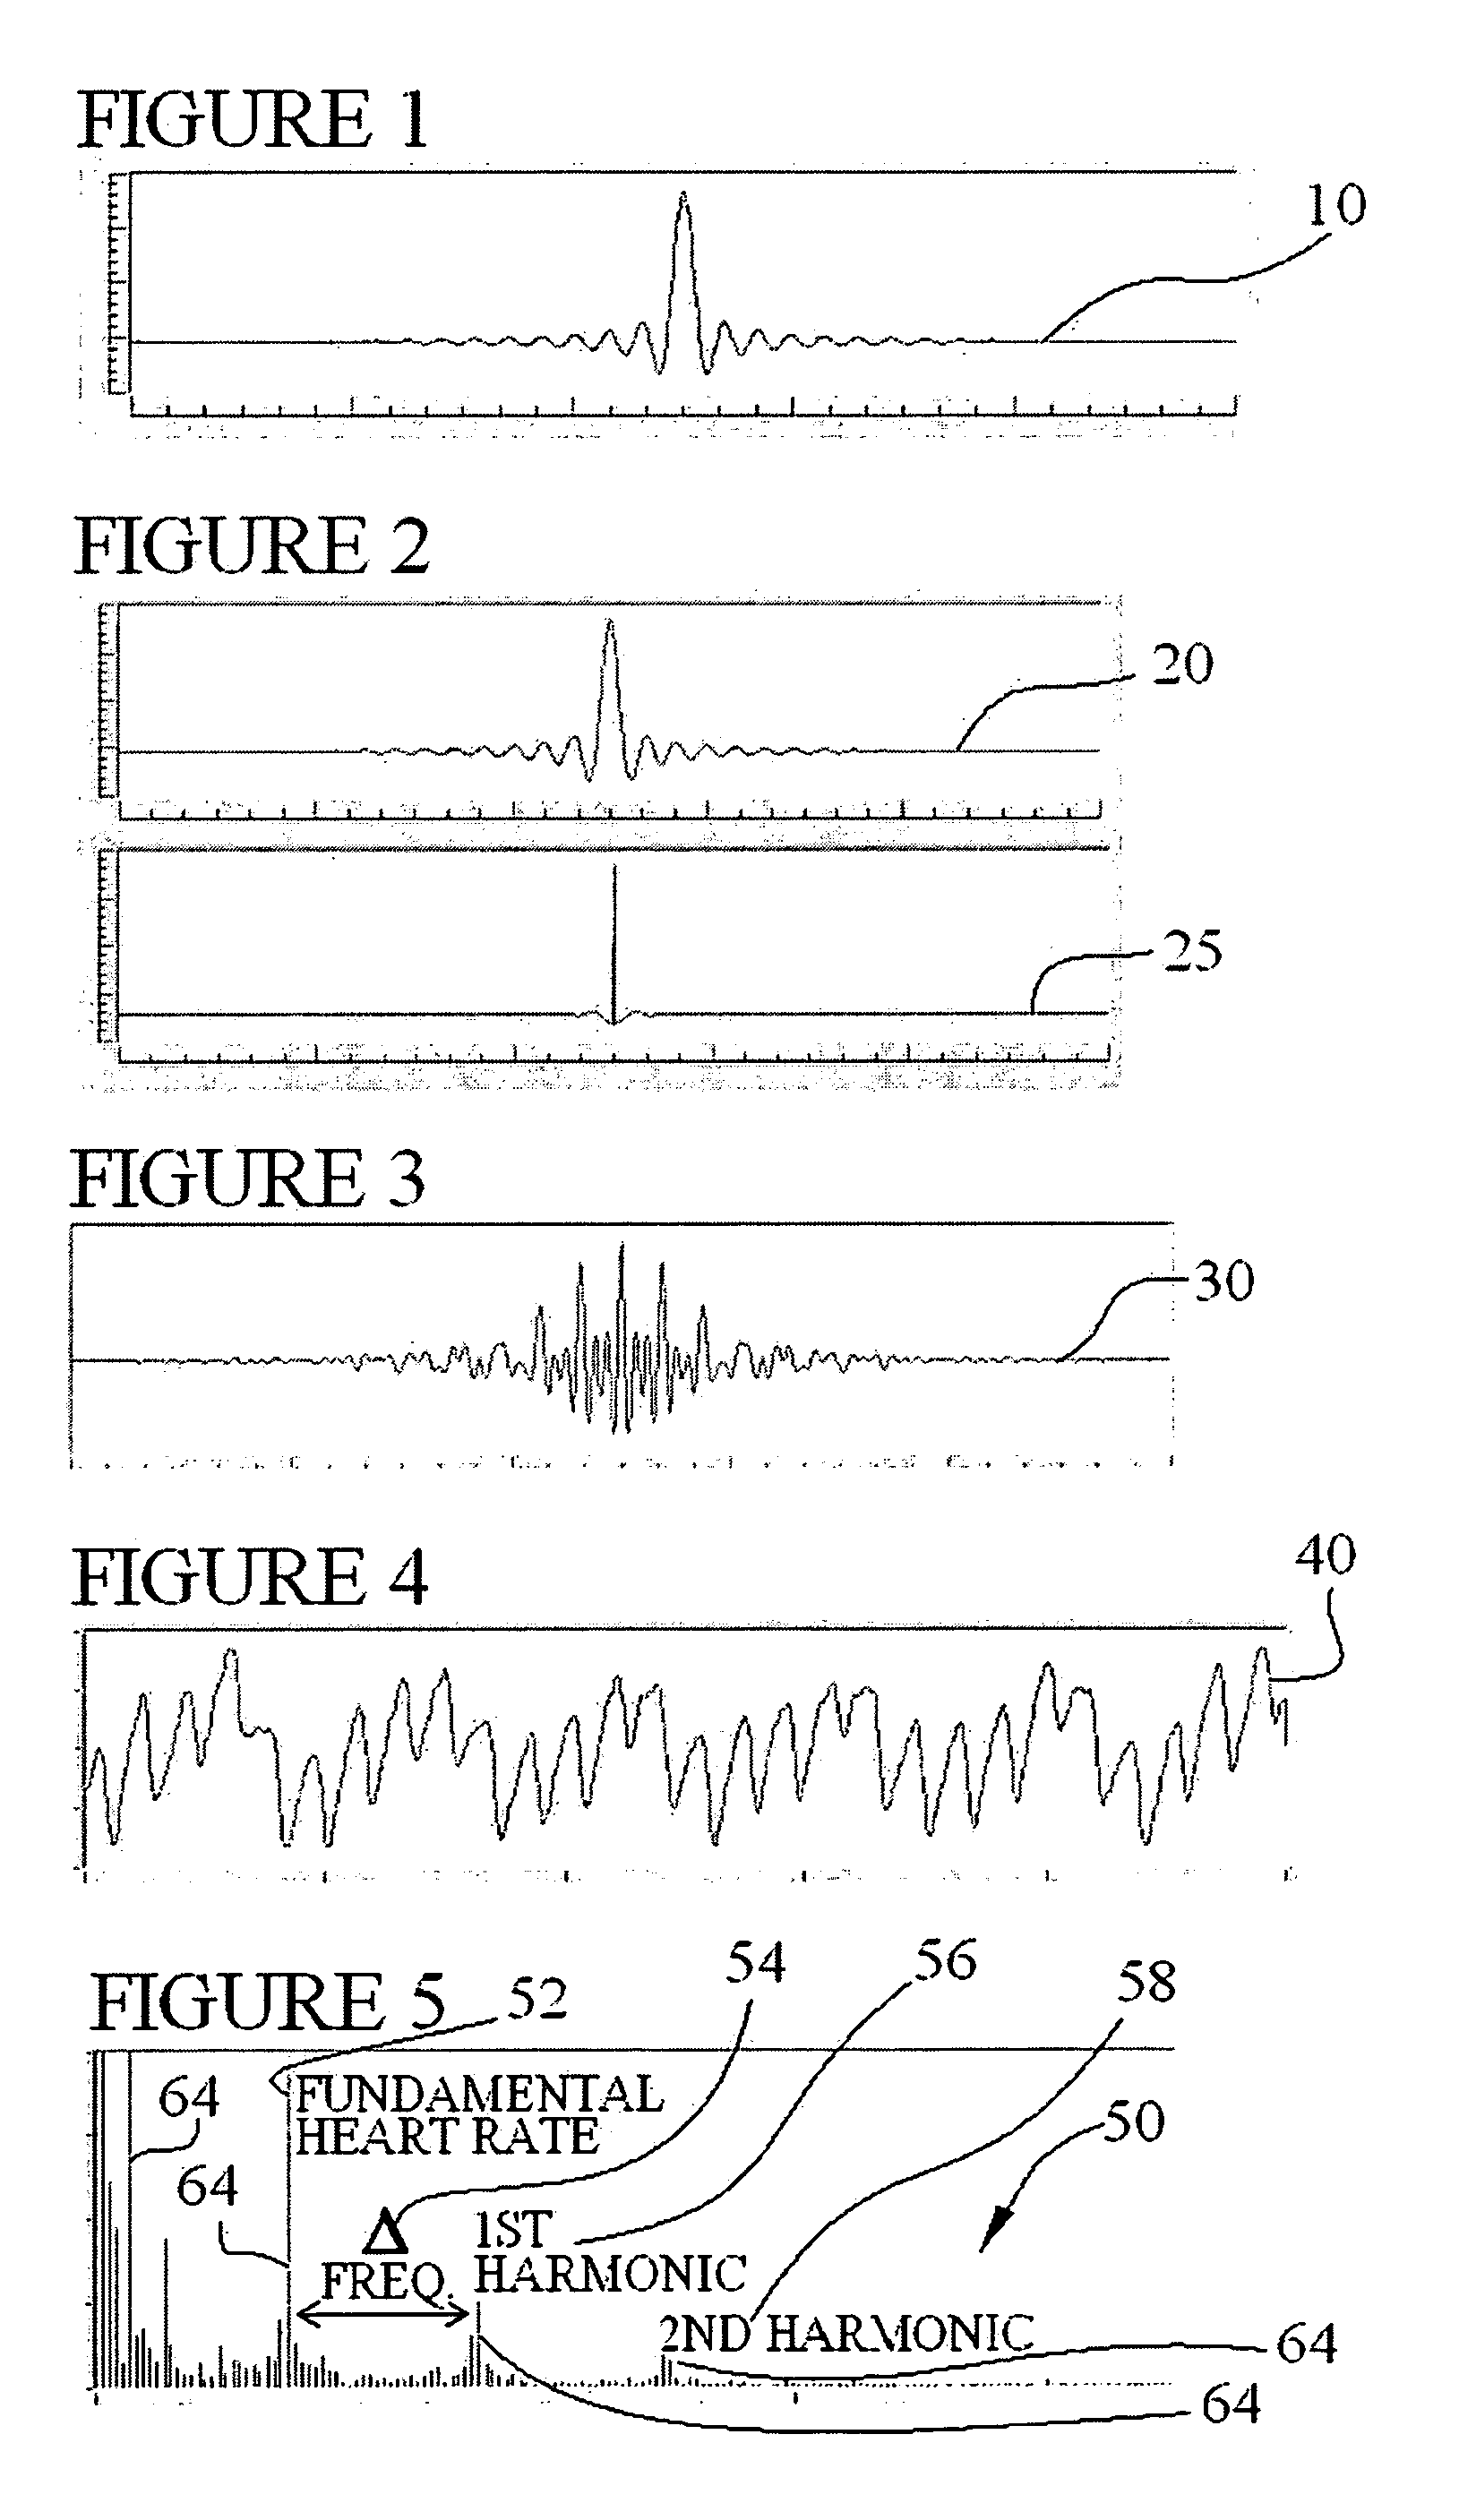 Techniques for accurately deriving physiologic parameters of a subject from photoplethysmographic measurements